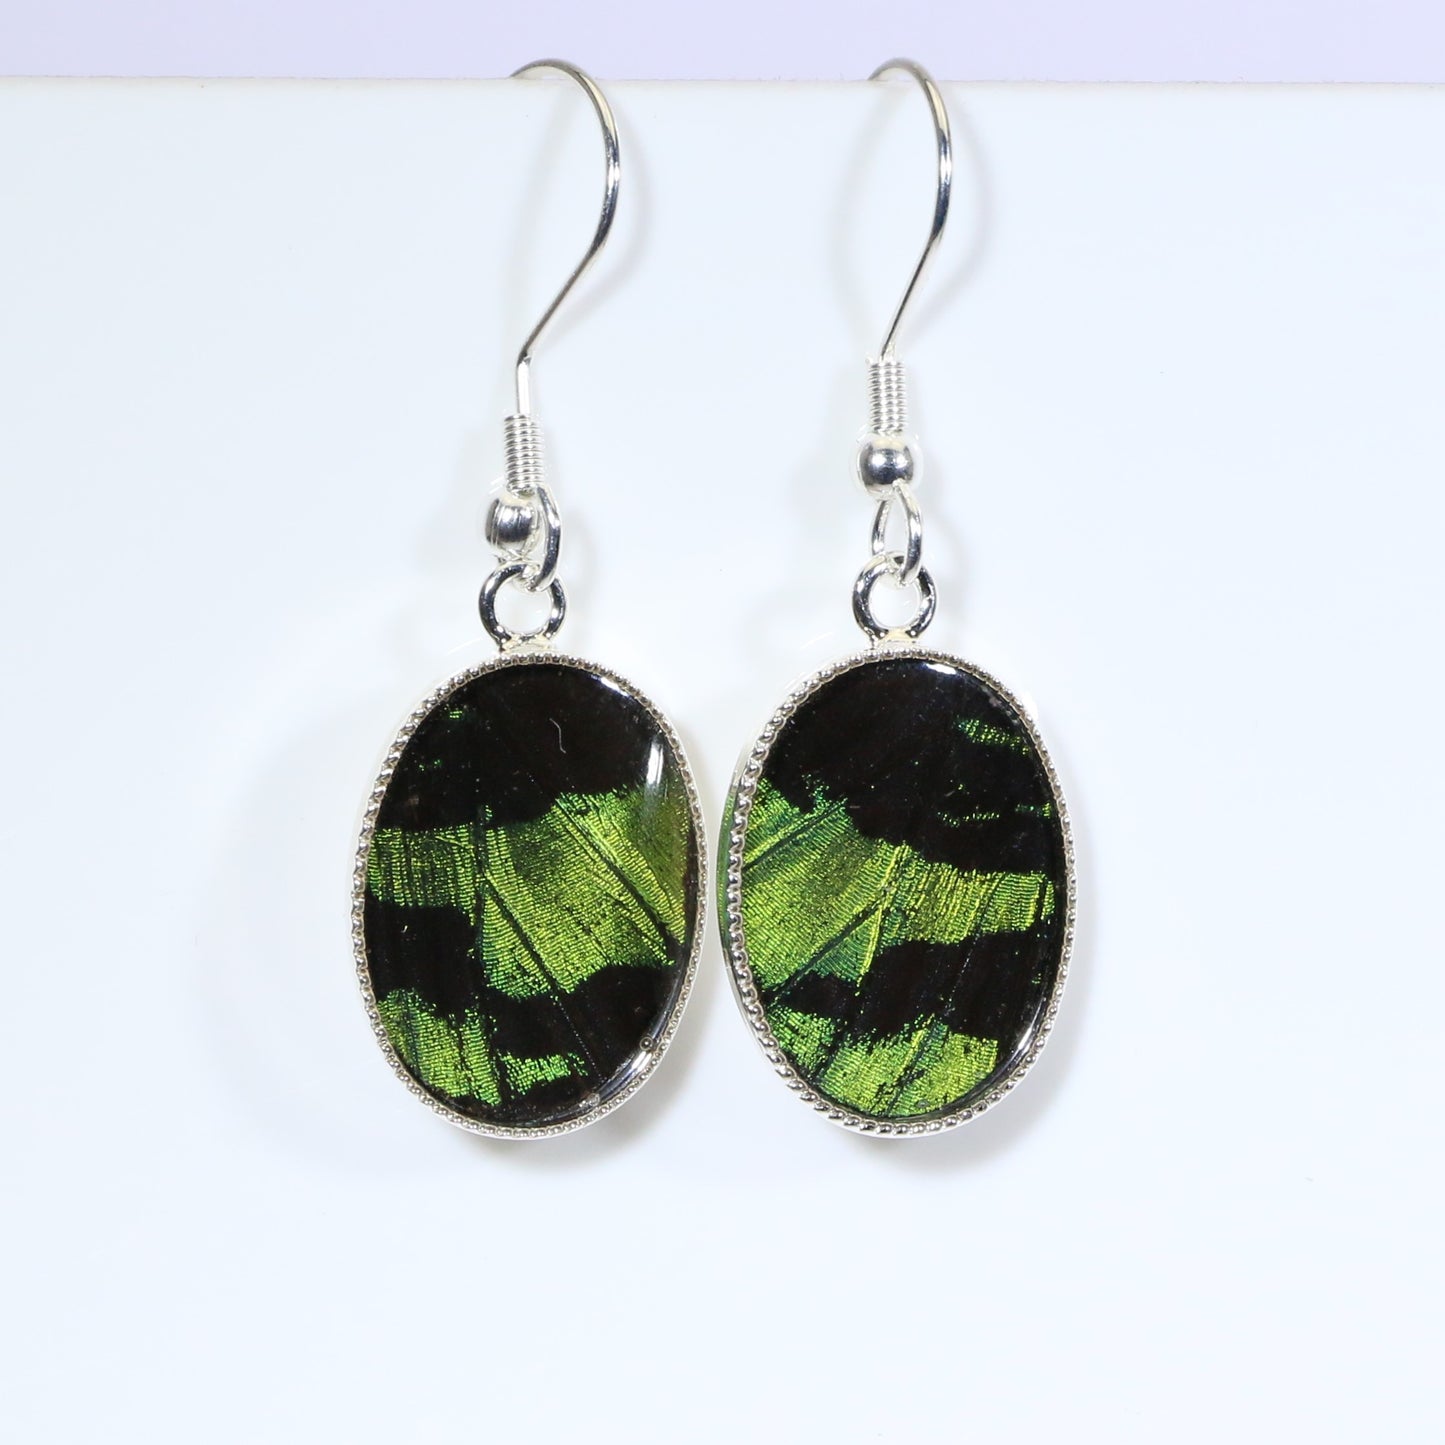 51103 - Real Butterfly Wing Jewelry - Earrings - Small - Sunset Moth - Green